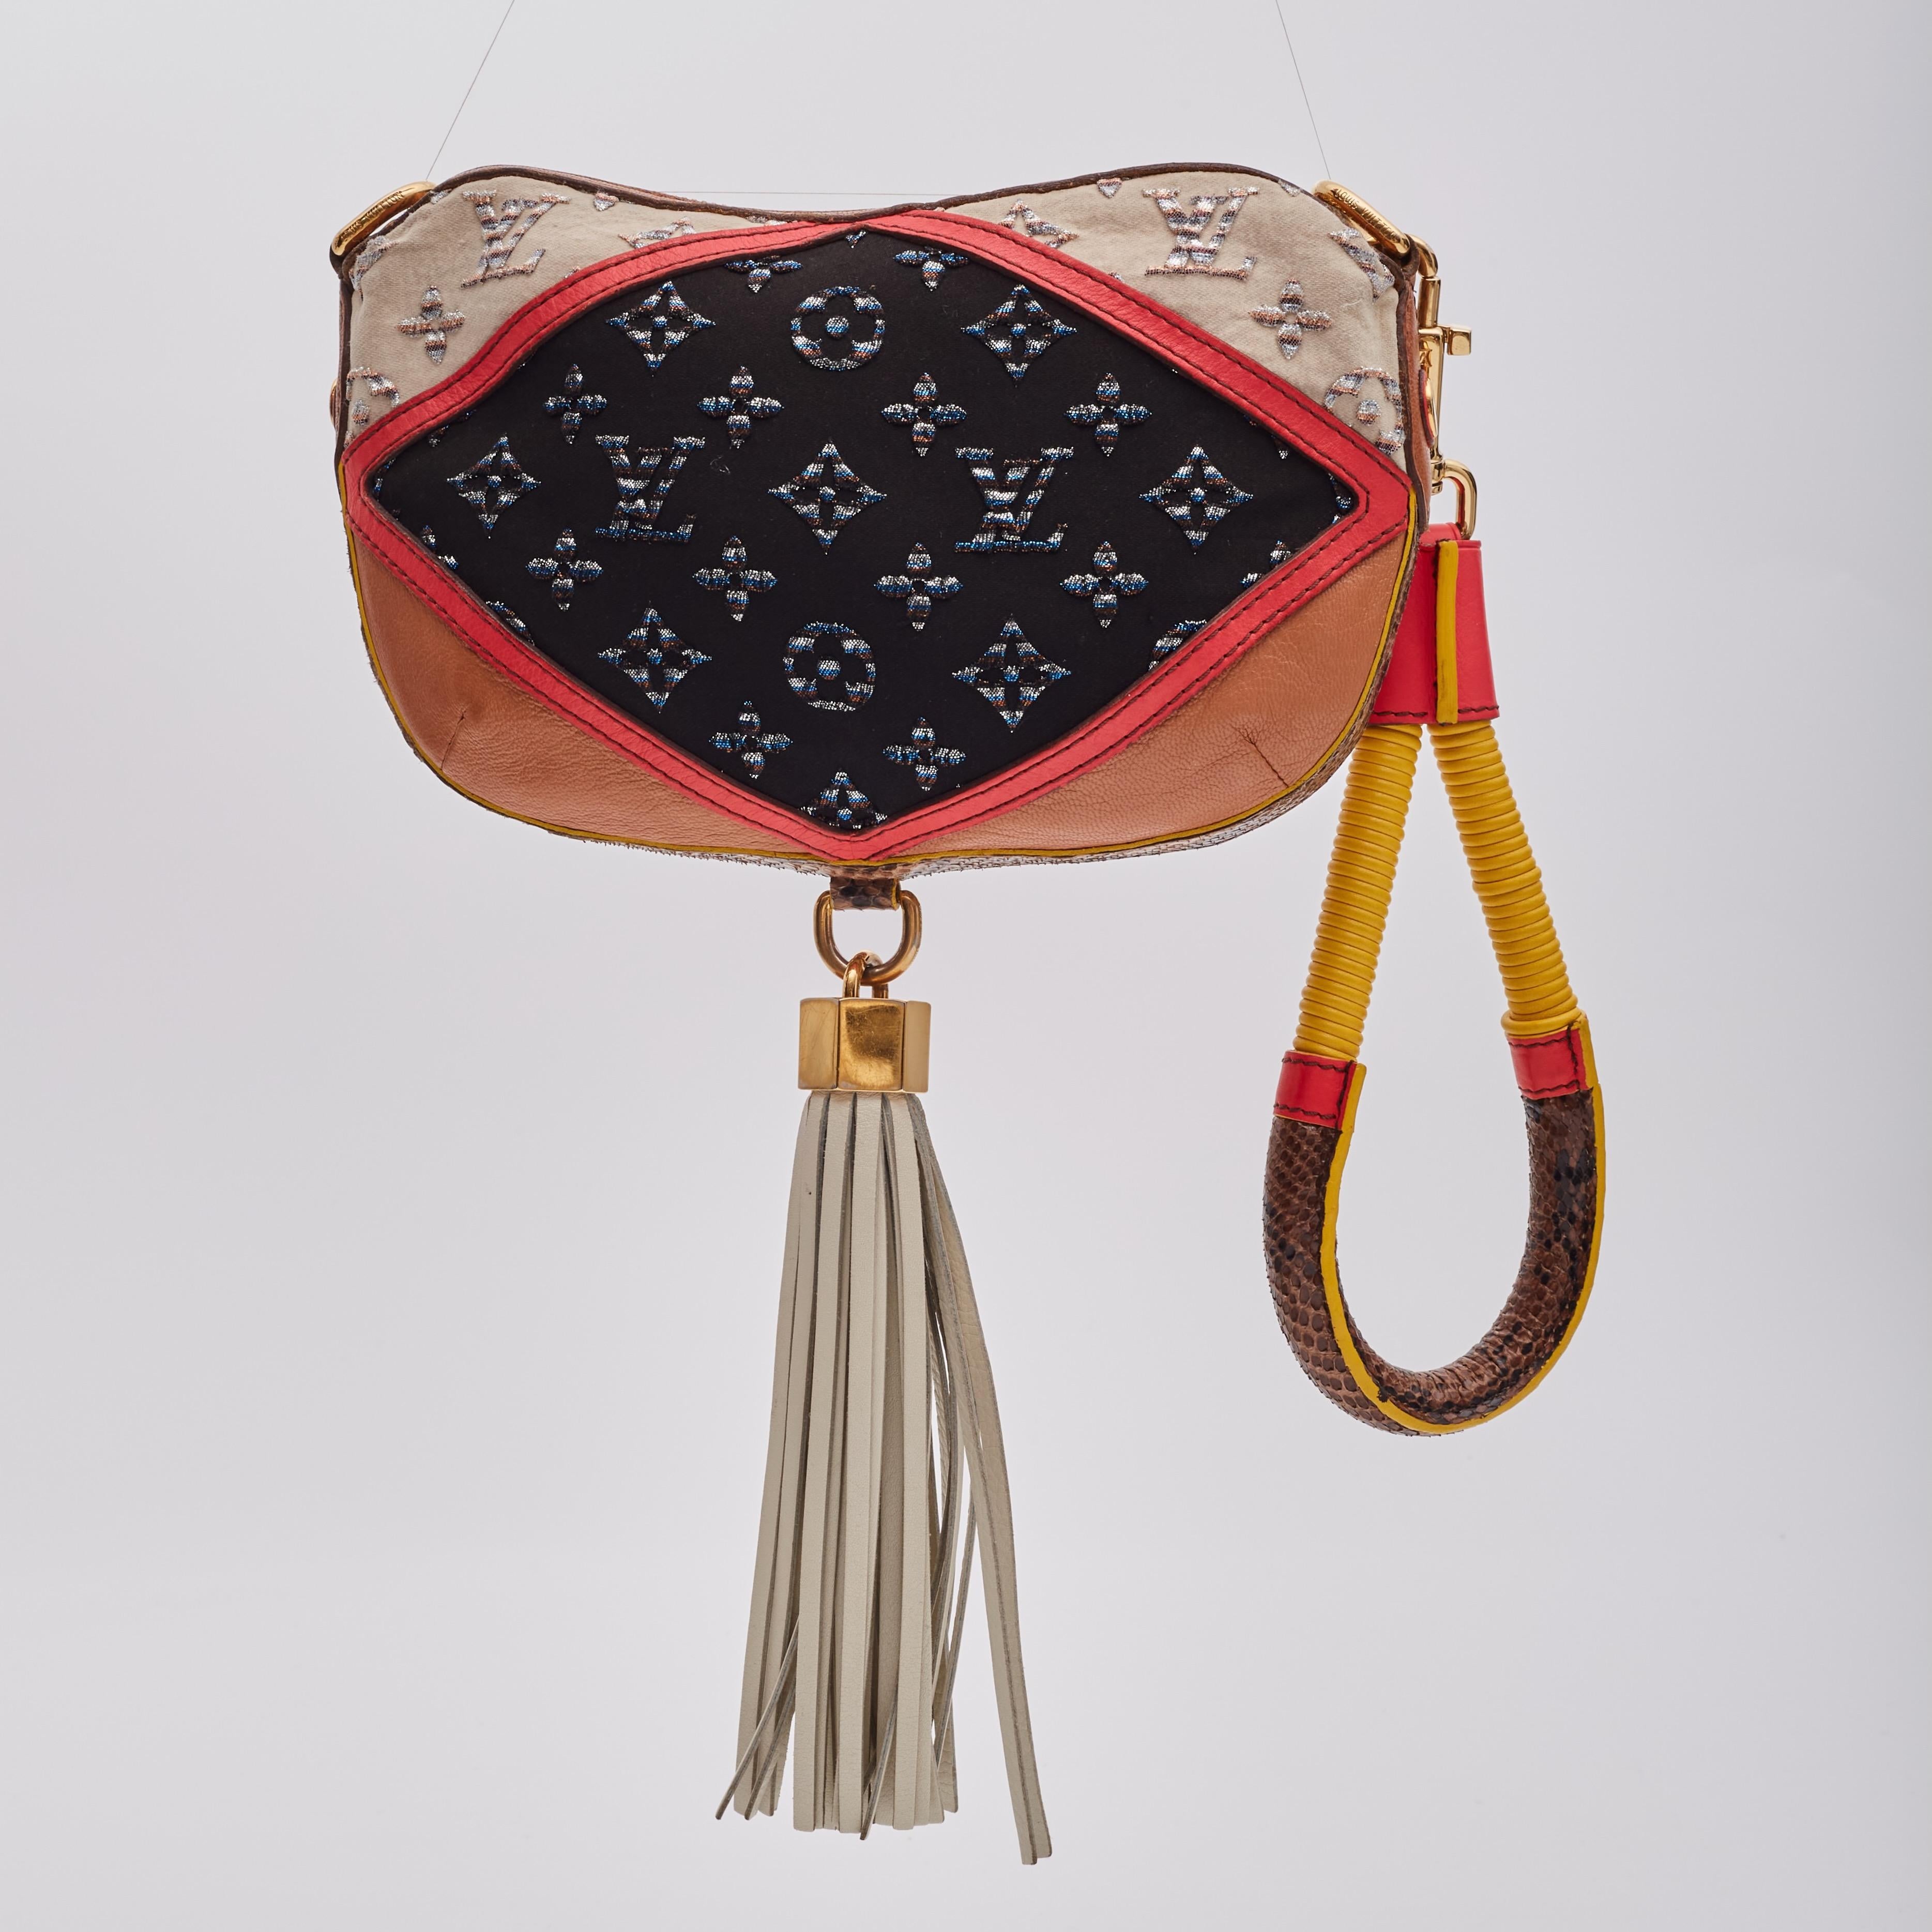 This pochette is made of tri-toned leather with a sequined Louis Vuitton monogram and python skin embellishment on the sides. There is a highly decorative wrist strap of python and pink leather with a gold clasp and a leather fringe tassel with a